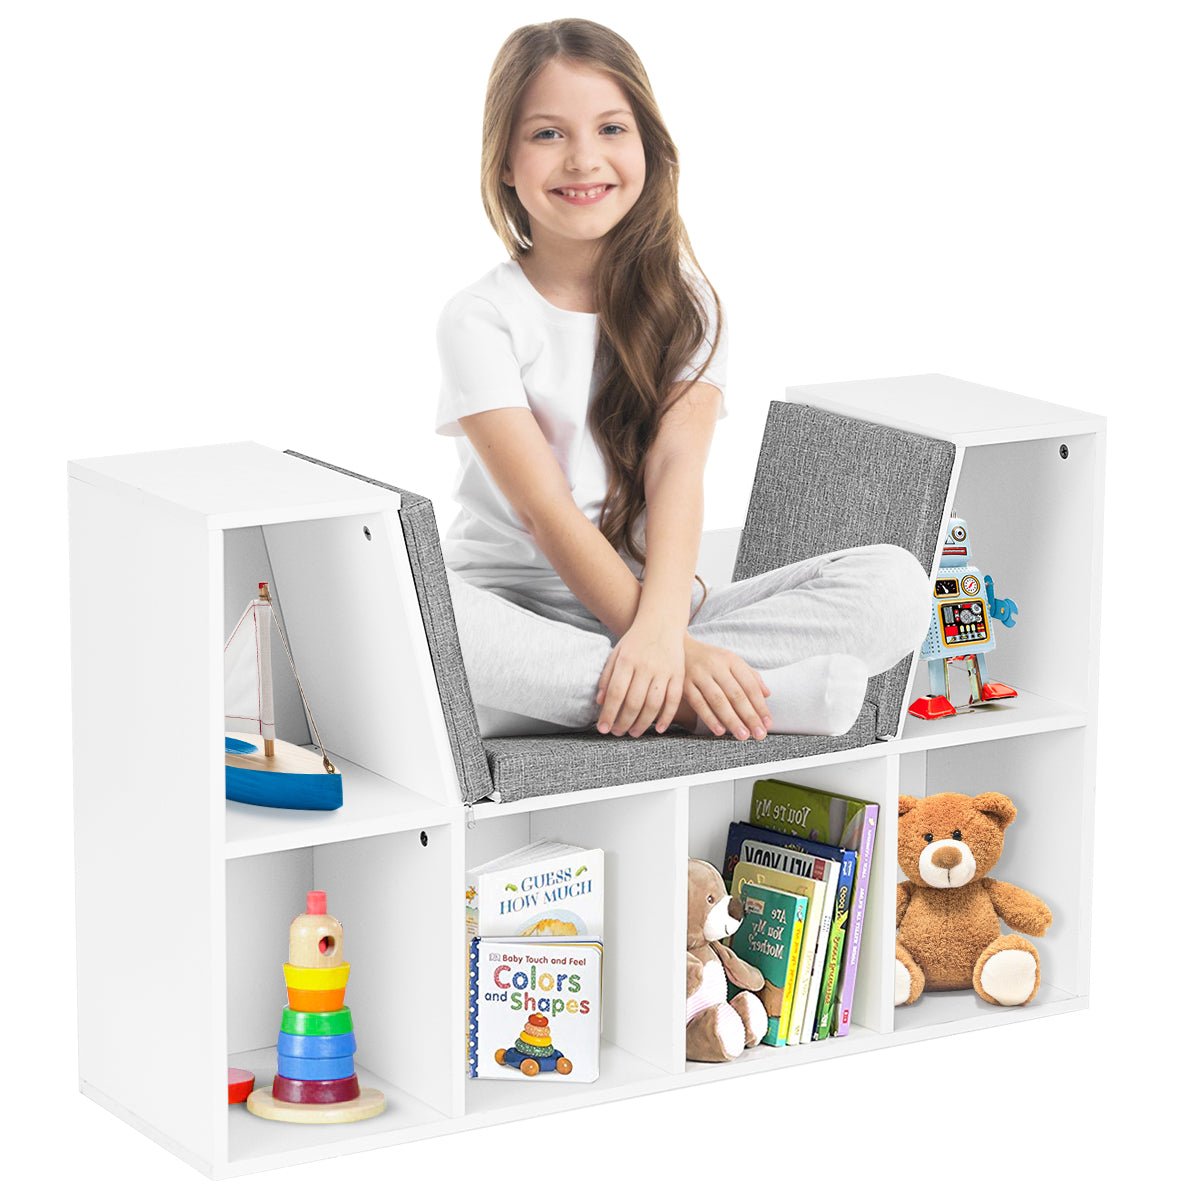  Kid's Wooden Toy Storage - Organizer with 5 Drawers, Clean and Clear